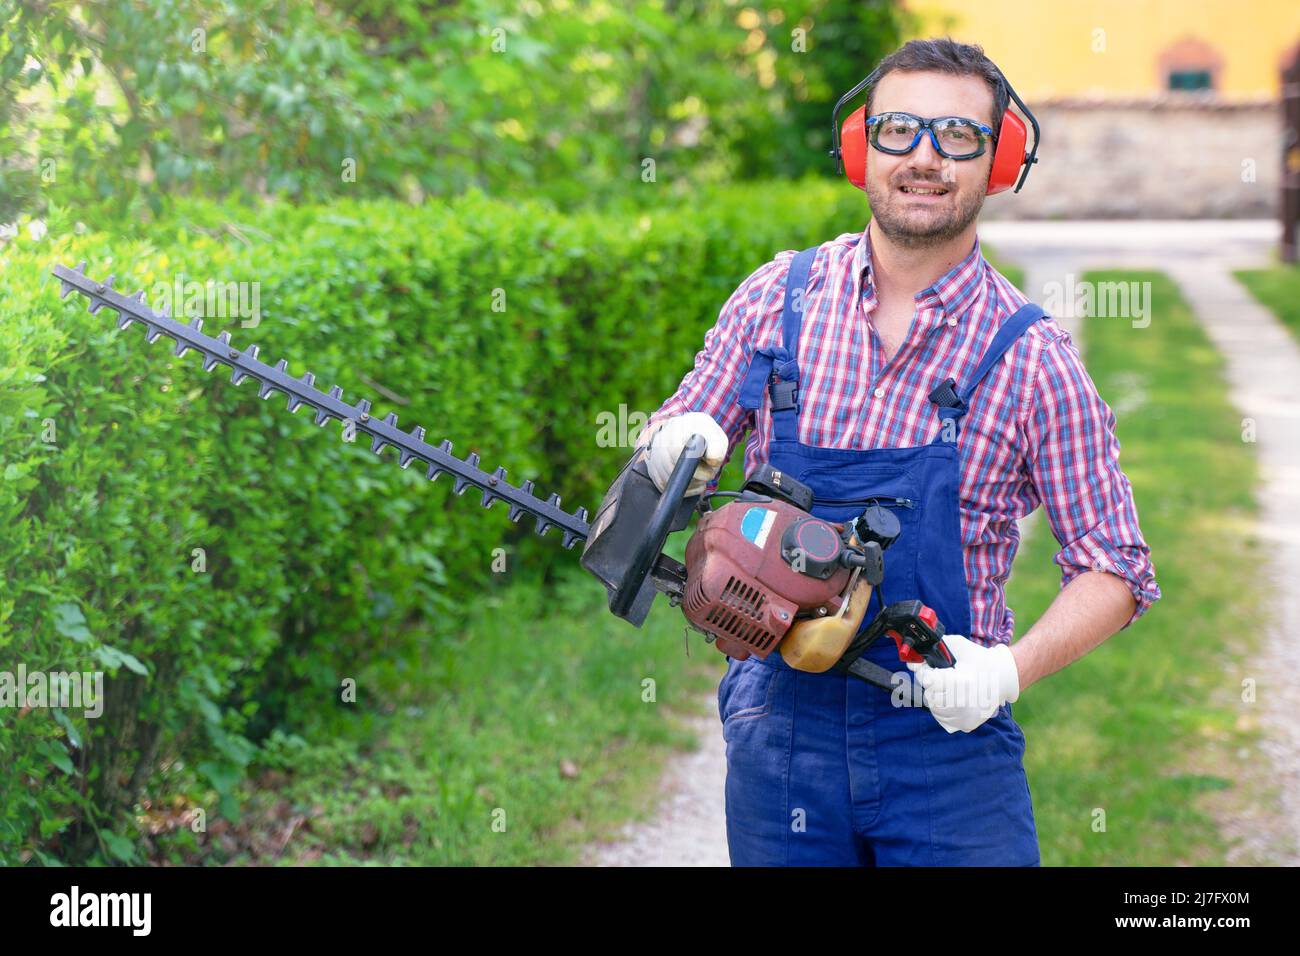 One gardener shaping hedge using hedge trimmer Stock Photo